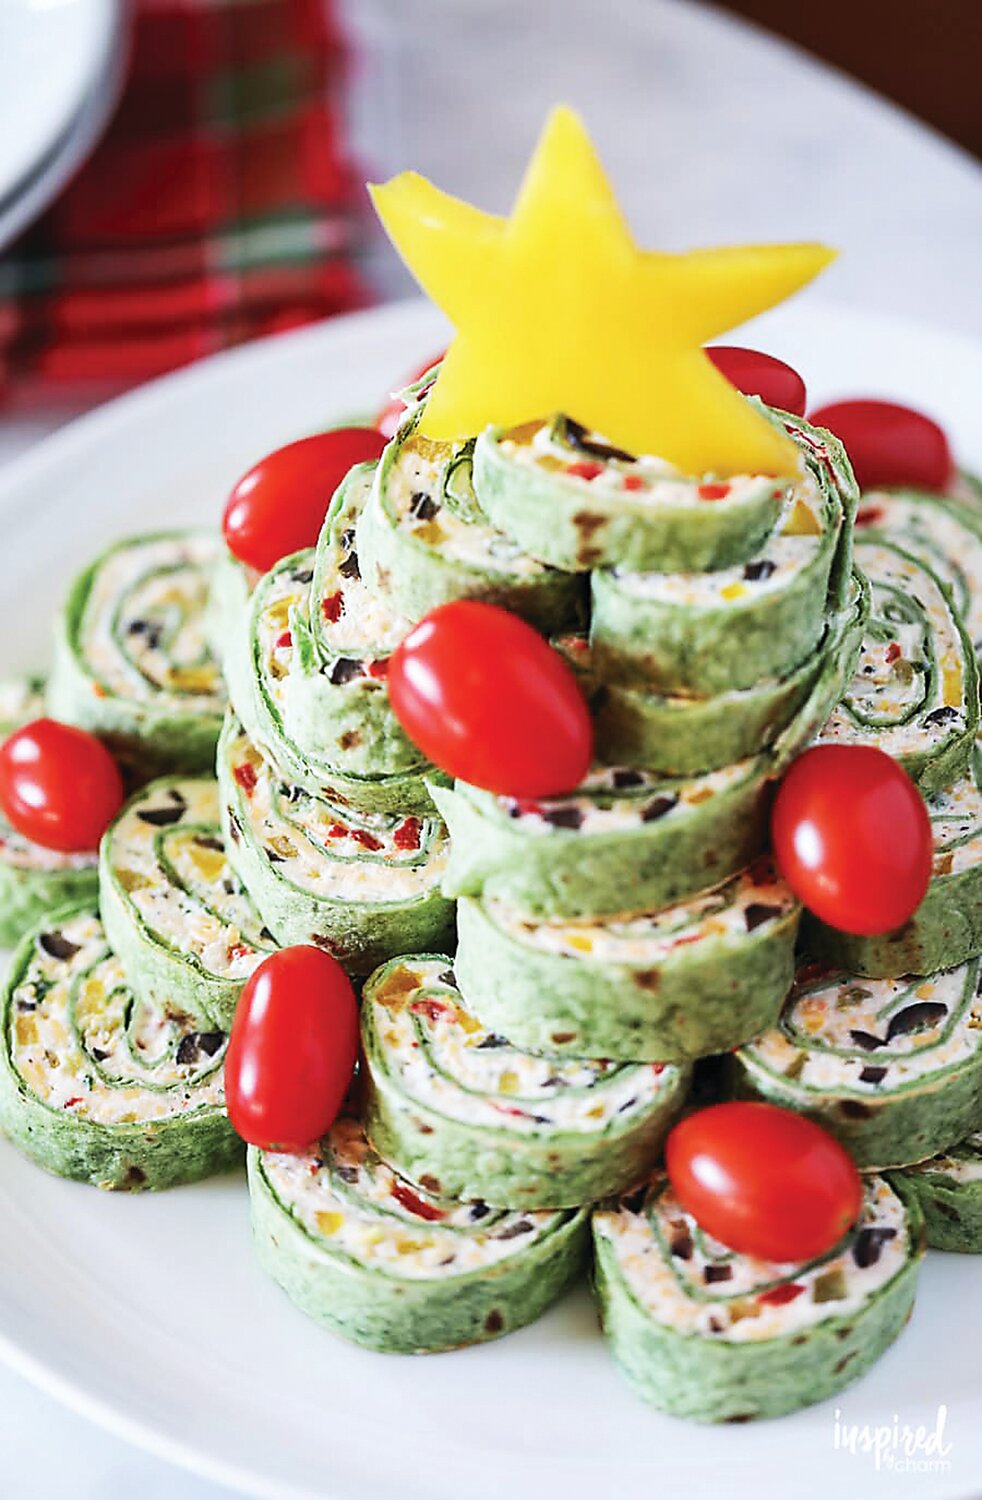 Tortilla roll-ups are an easy appetizer that allows plenty of opportunity for creativity.